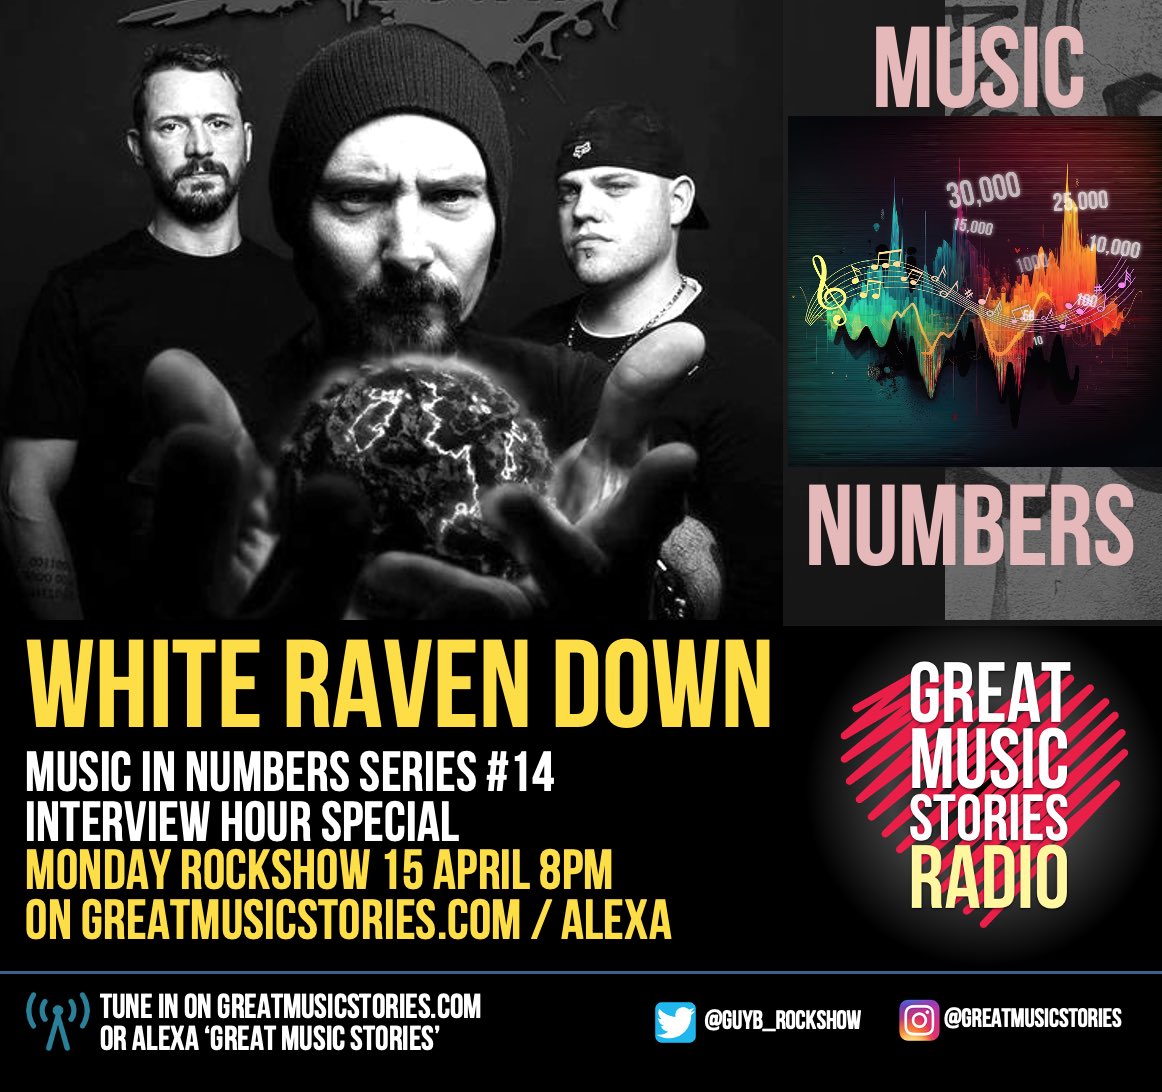 White Raven Down return. Old friends are back on the Monday rockshow for an hour talking music and numbers. @WhiteRavenDown Monday 8pm